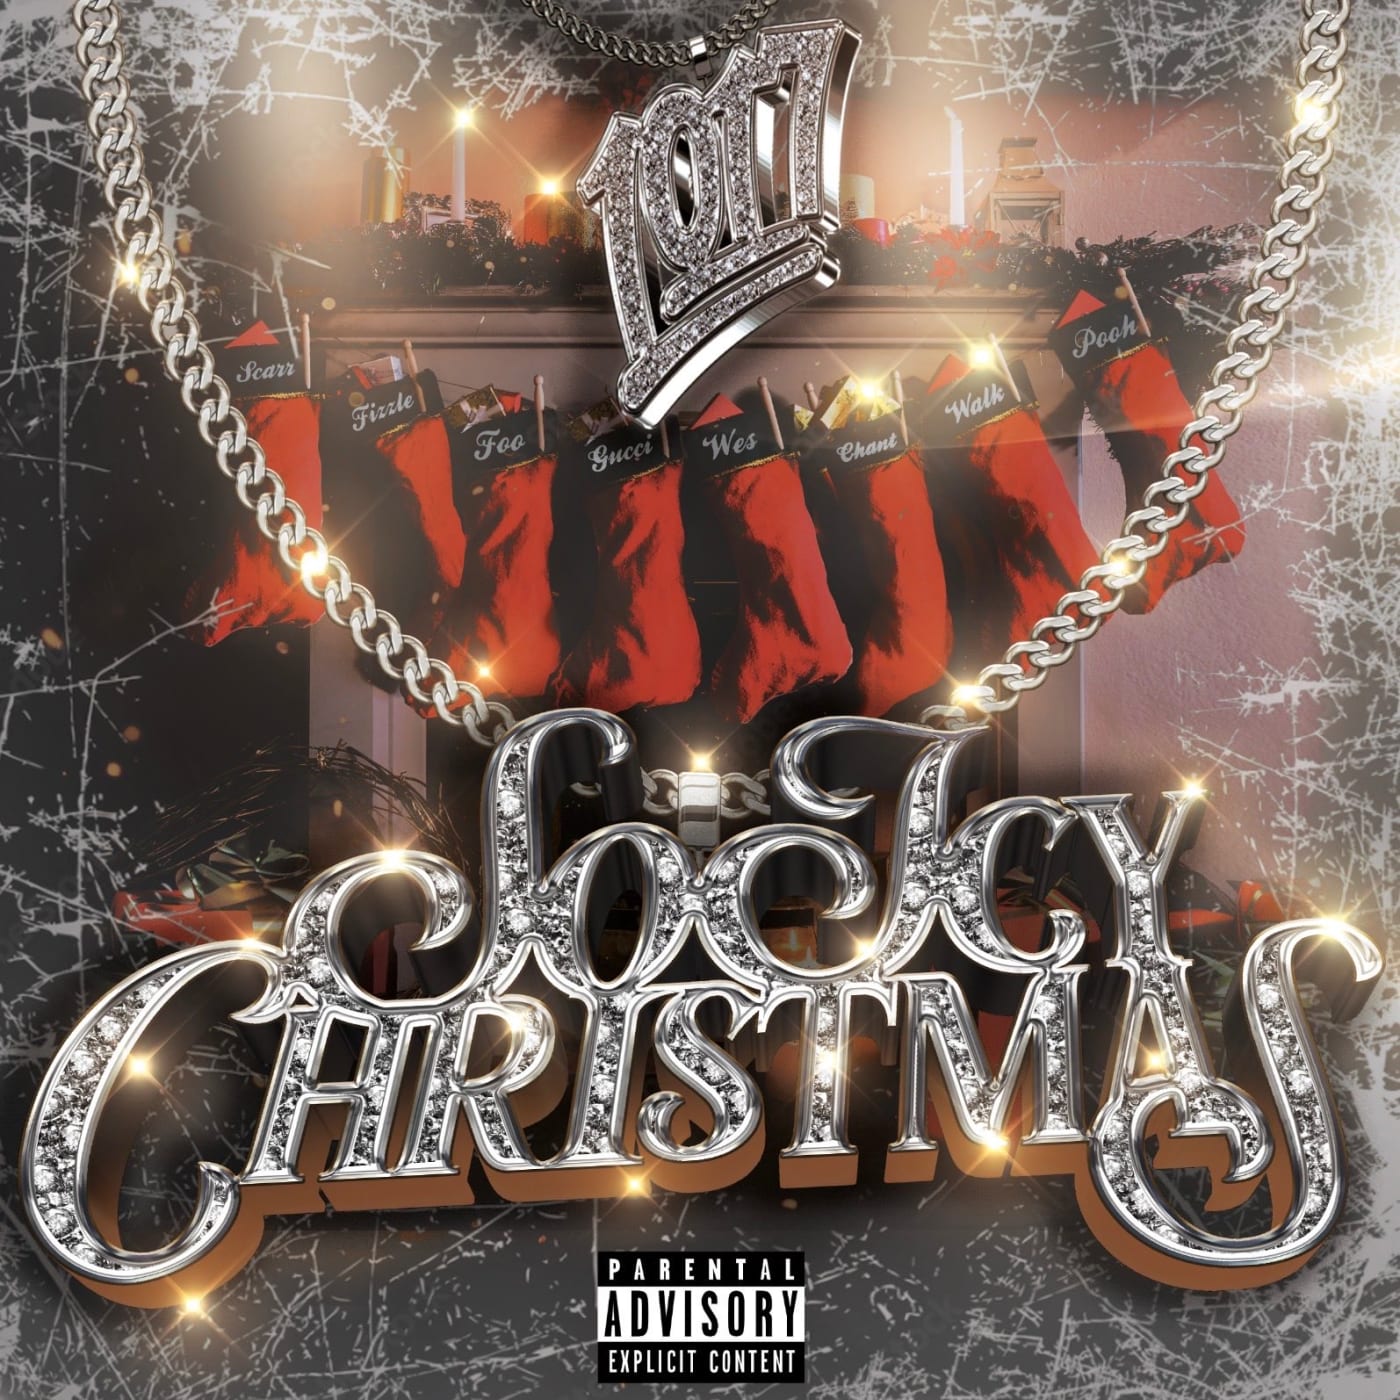 The cover art to Gucci Mane and 1017's 'So Icy Christmas' compilation album.